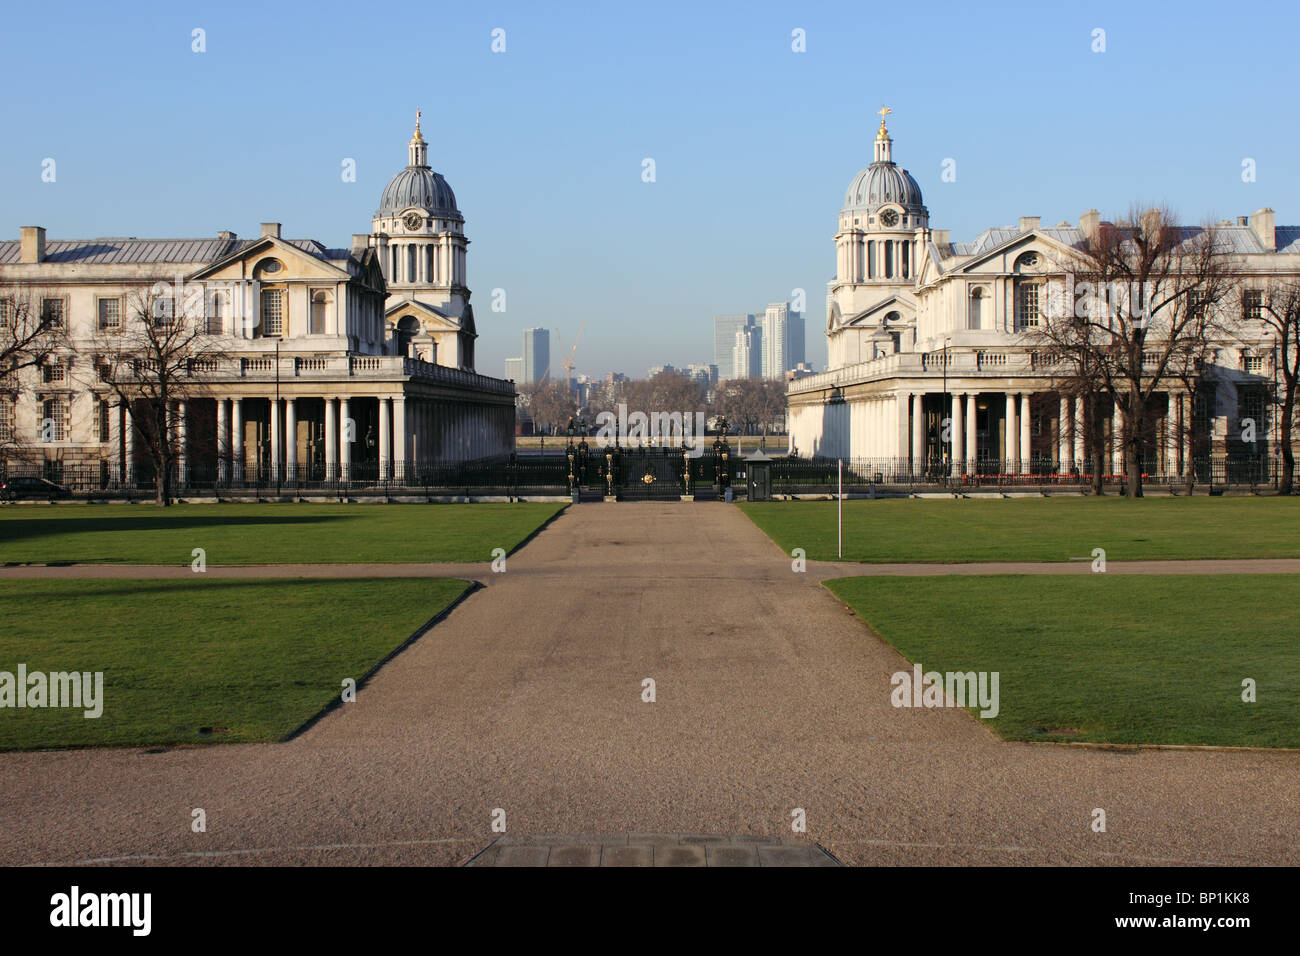 Symmetrical view of Royal Naval College from the Queens House, Greenwich, London, England, UK, with Canary Wharf in background Stock Photo